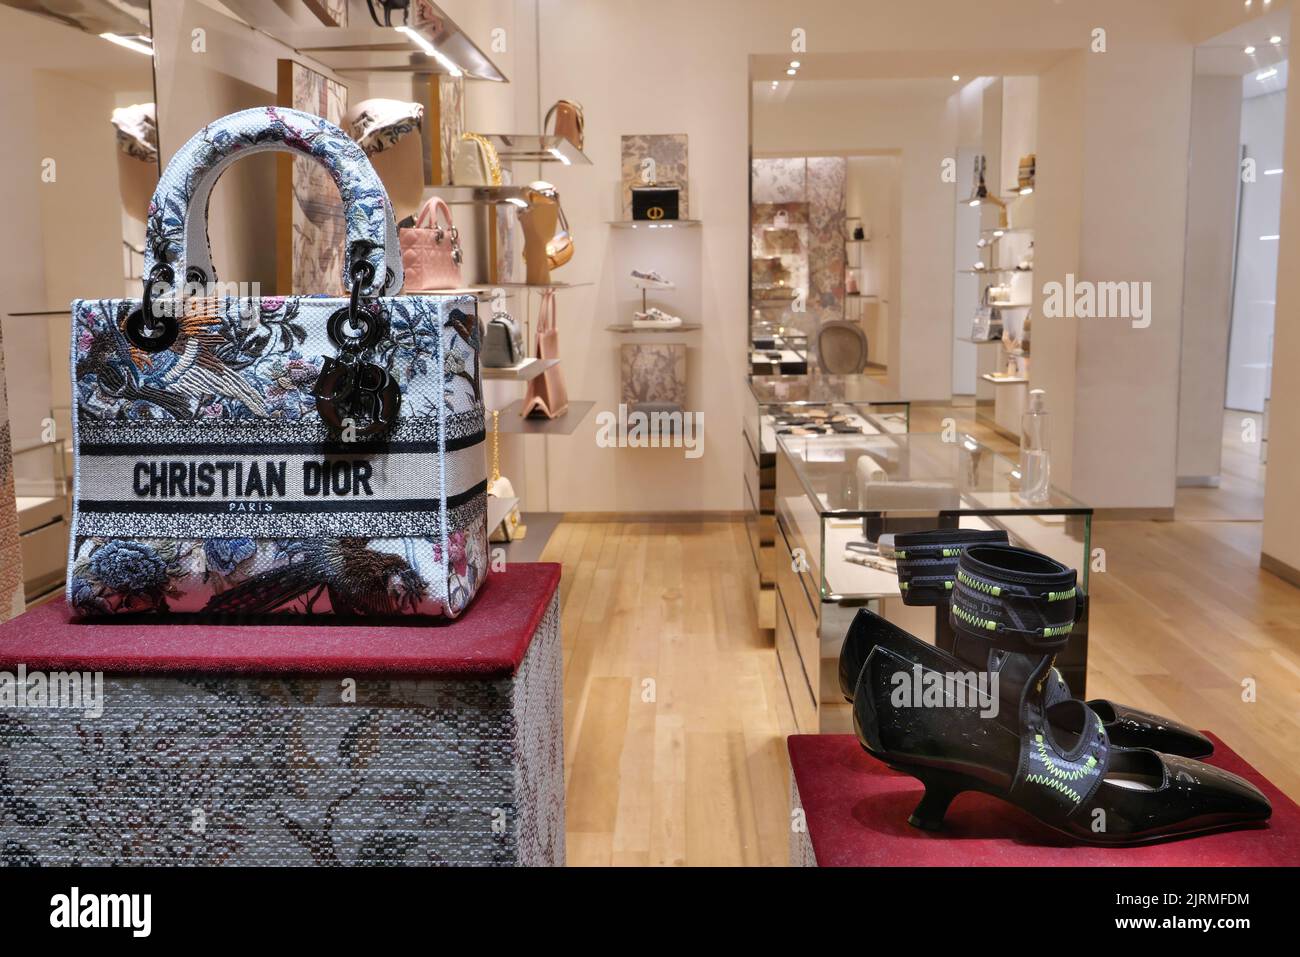 BAG AND SHOES ON DISPLAY AT CHRISTIAN DIOR FASHION BOUTIQUE Stock Photo